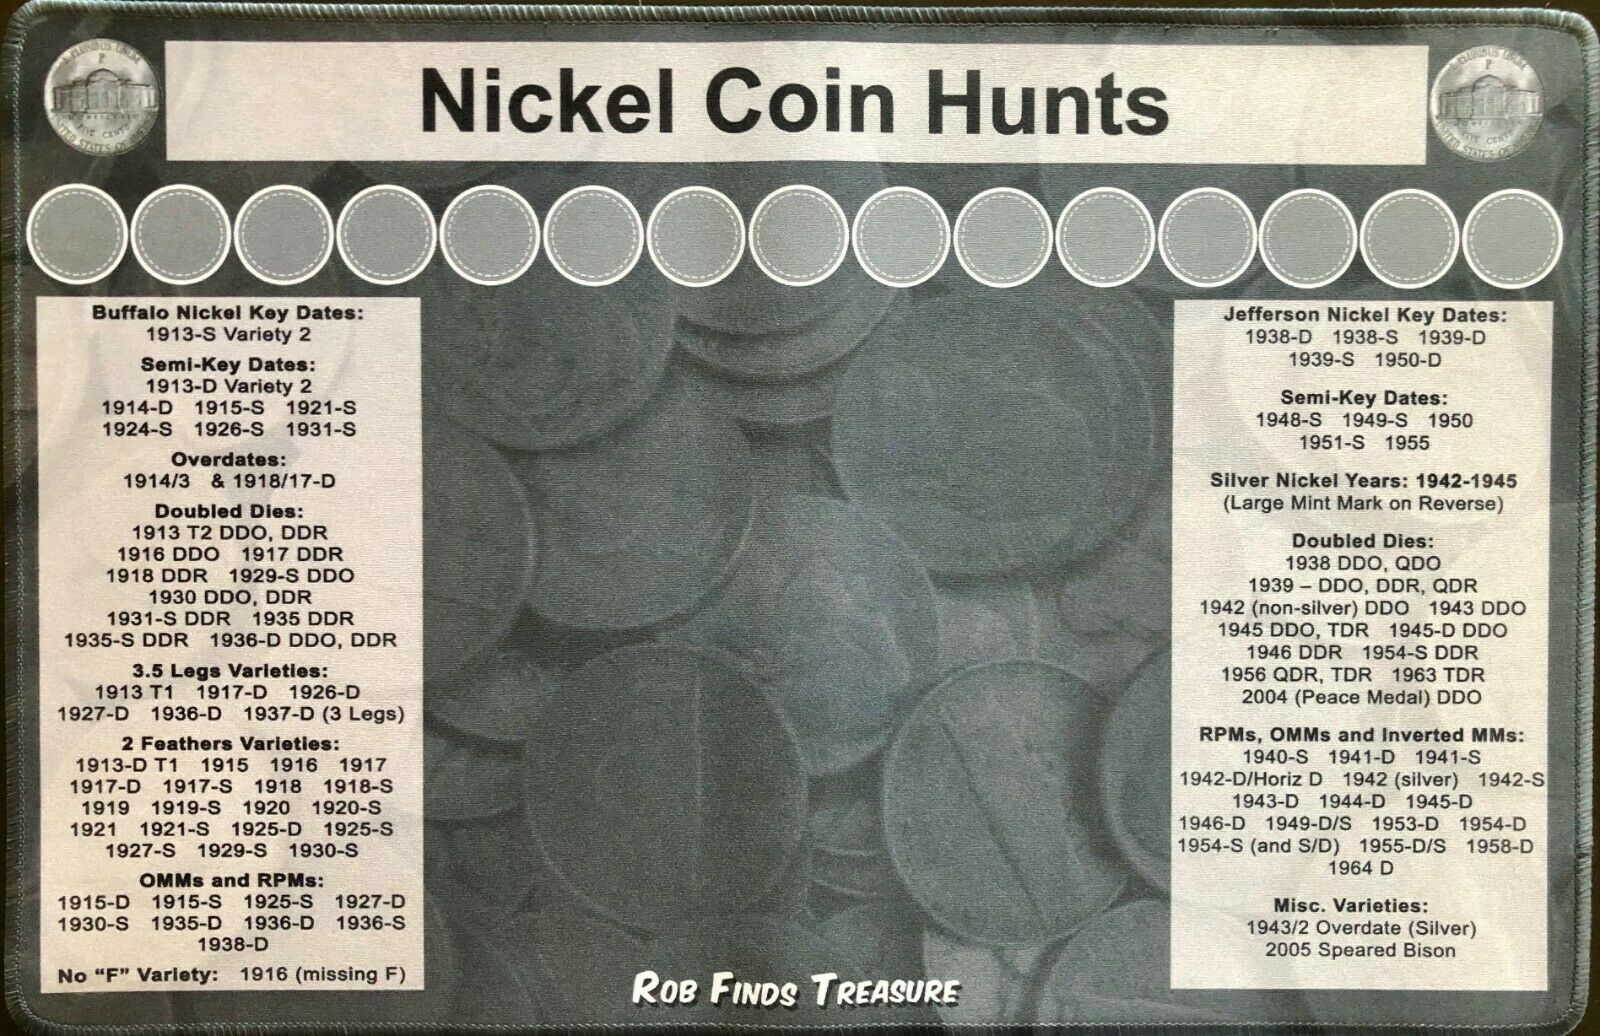 11" X 17" Nickel Coin Roll Hunting Mat - Rubber Backed And Safe For Coins!